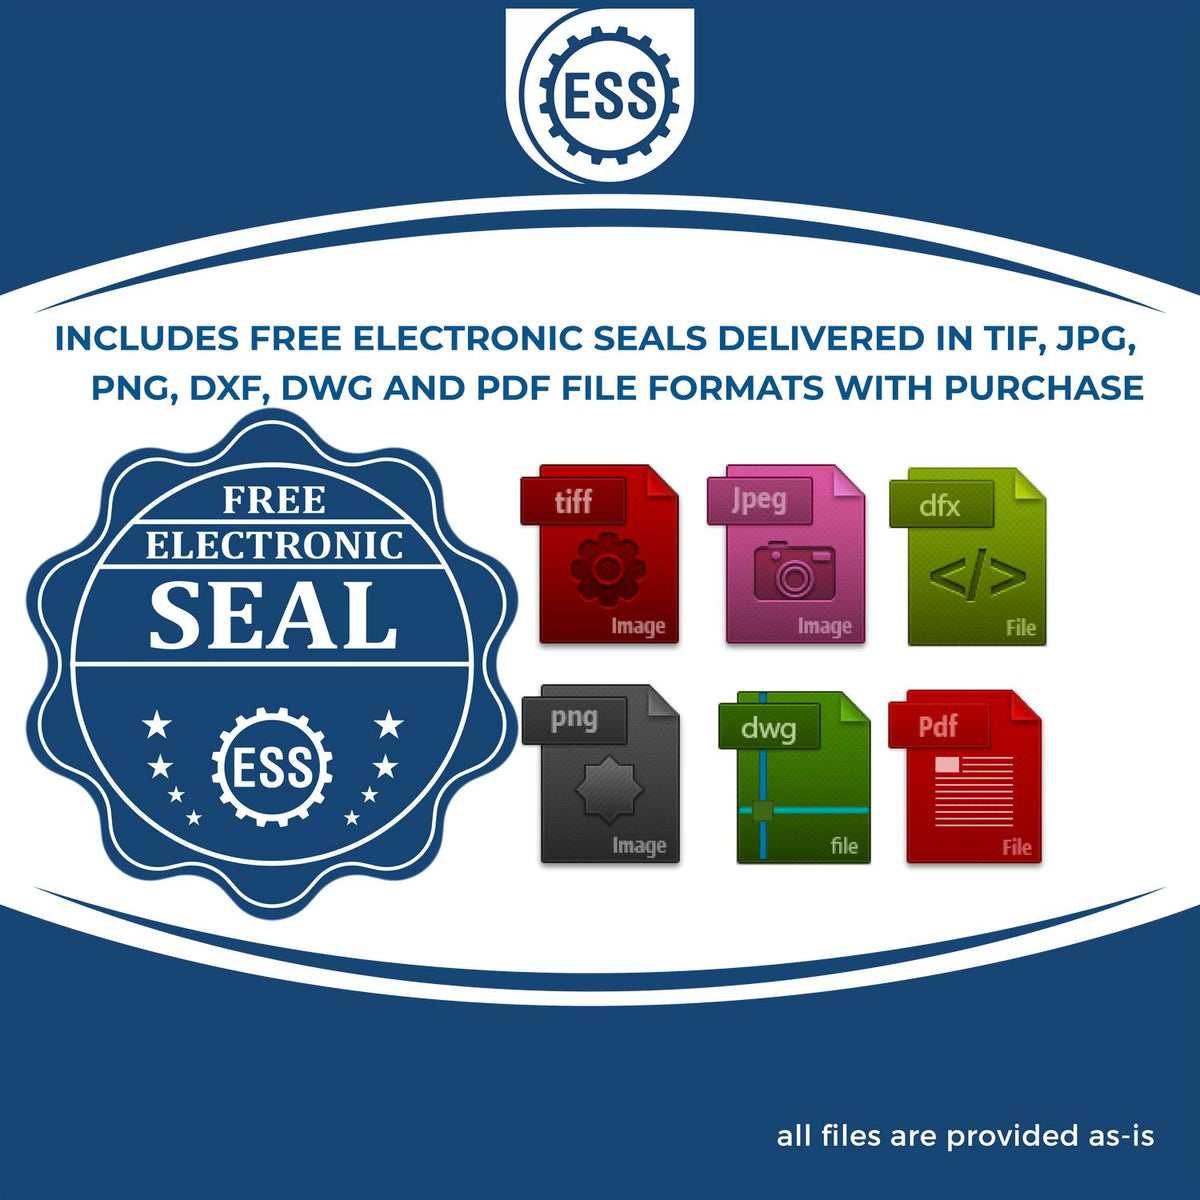 An infographic for the free electronic seal for the Gift Delaware Geologist Seal illustrating the different file type icons such as DXF, DWG, TIF, JPG and PNG.